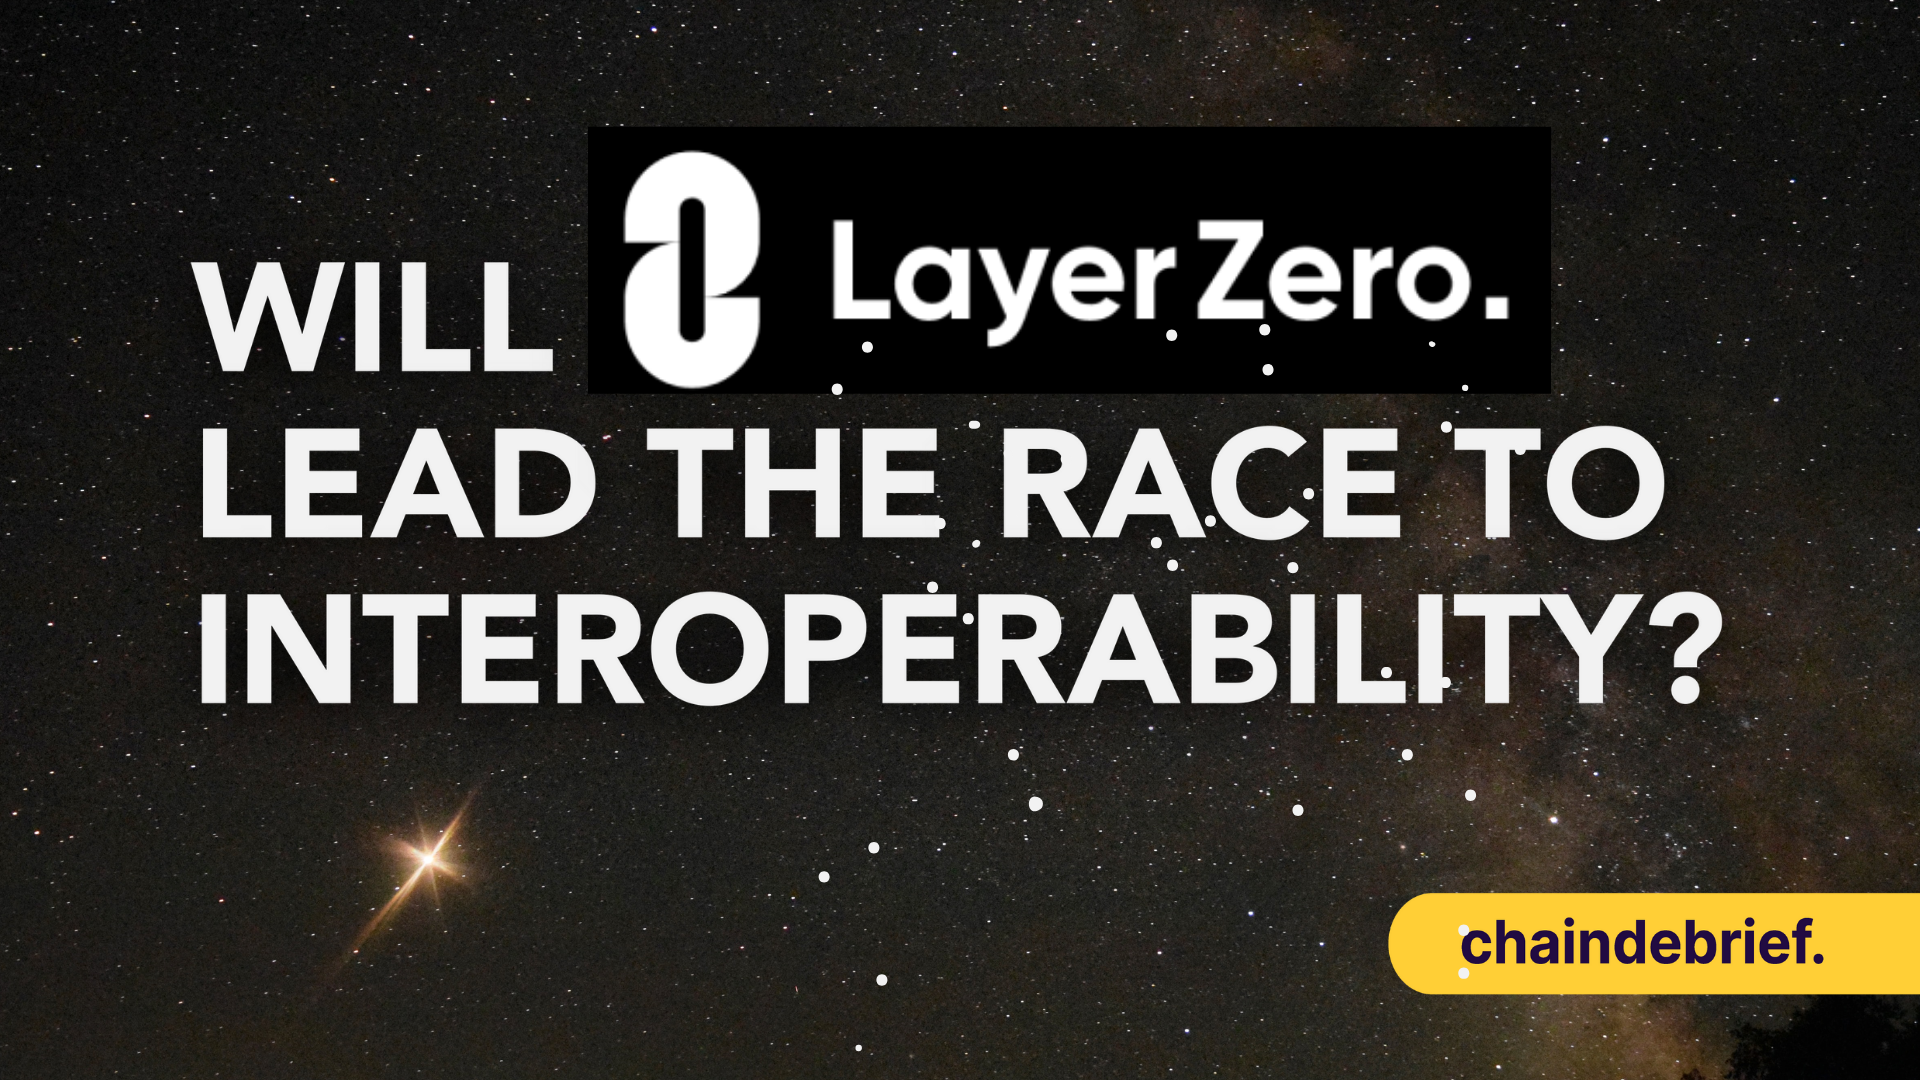 Is An Interoperable Future Certain? How LayerZero Will Lead The Race